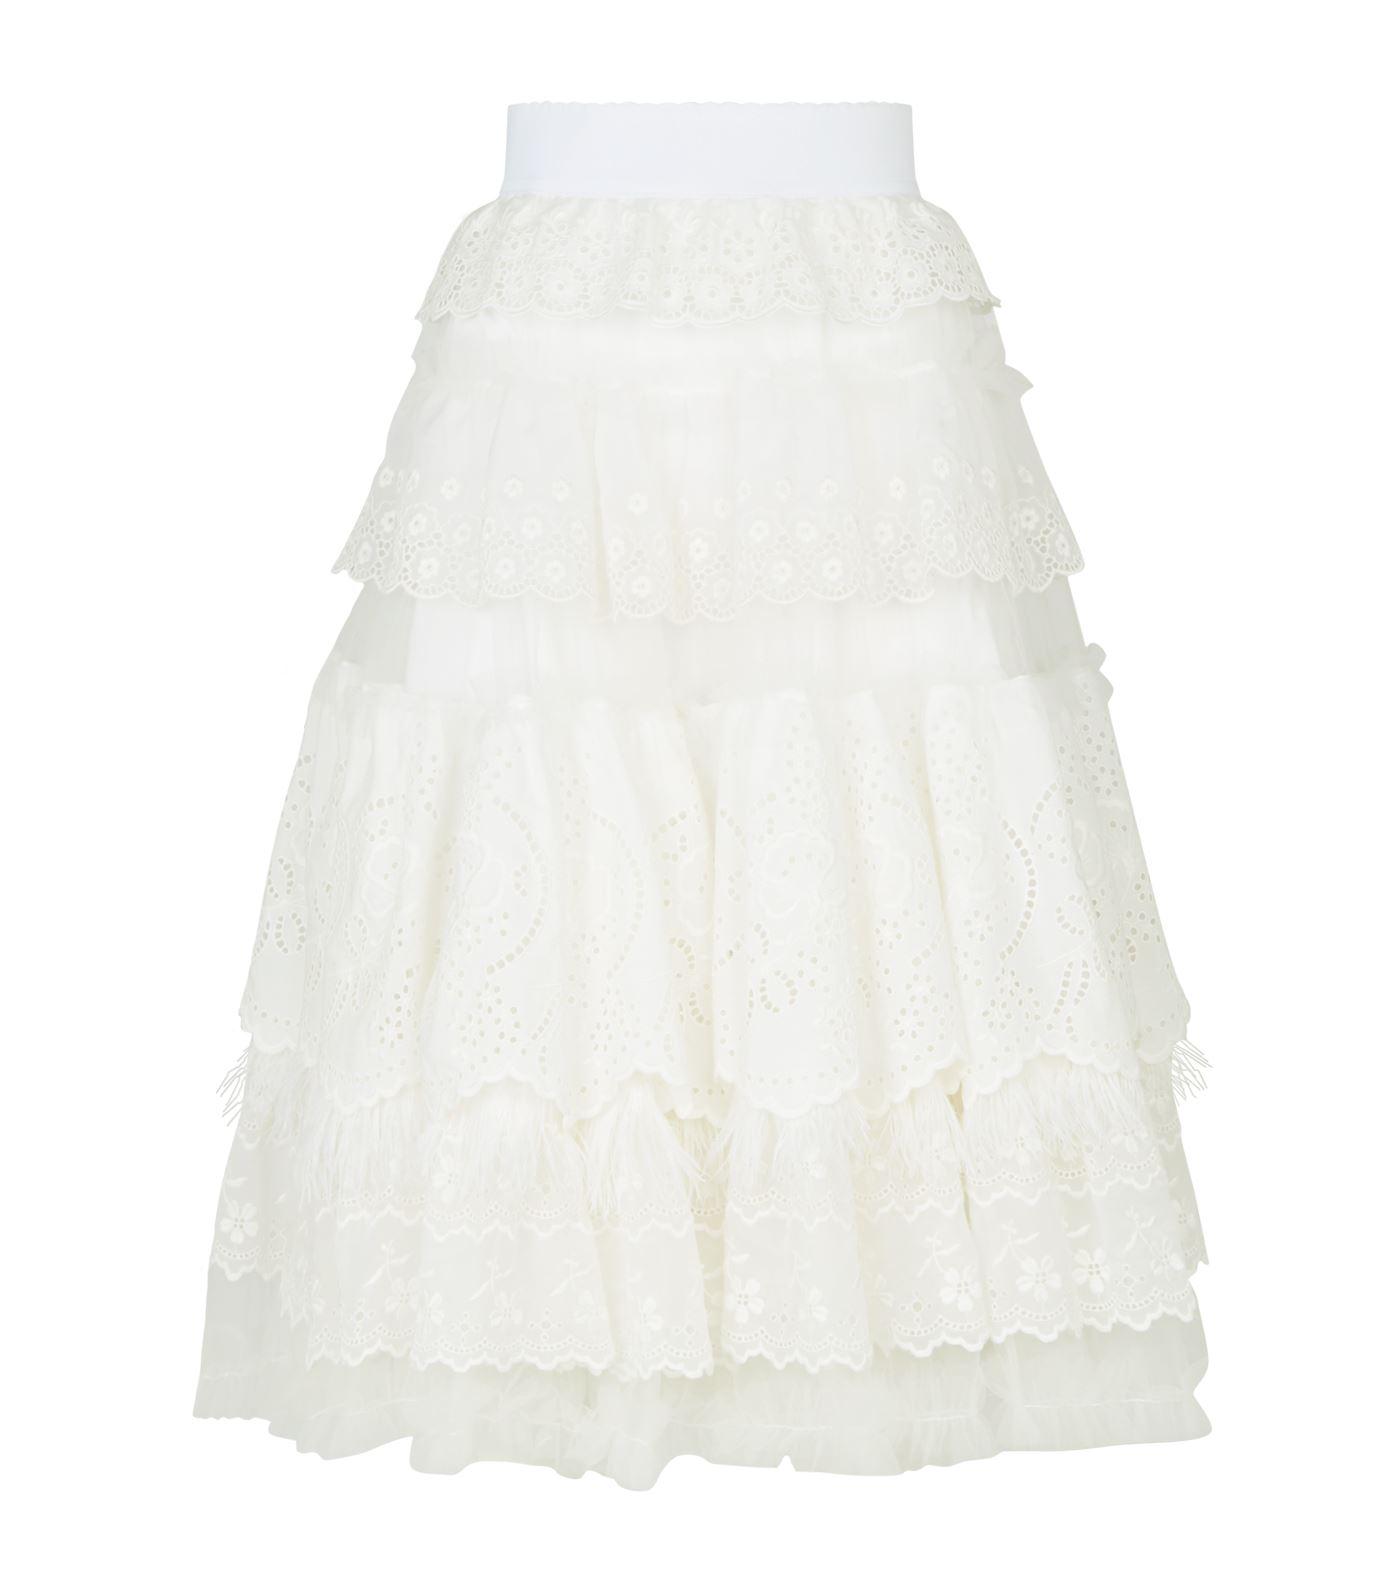 Lyst - Dolce & Gabbana Tiered Lace Skirt in White